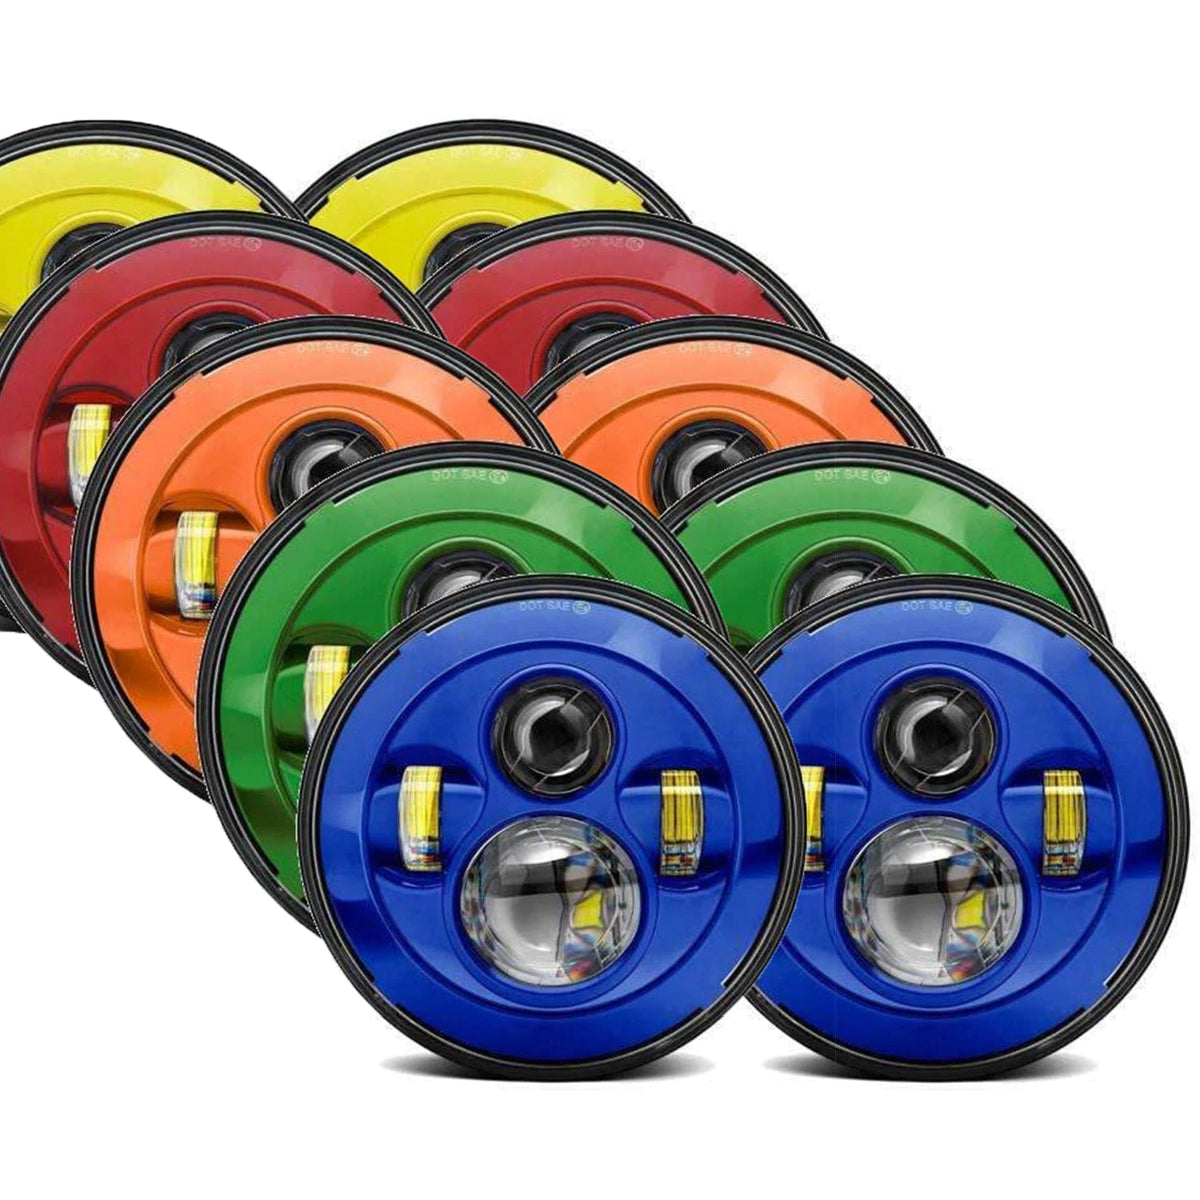 Jeep Colored LED Headlights - Comes with two Headlights and Anti-Flicker Harnesses